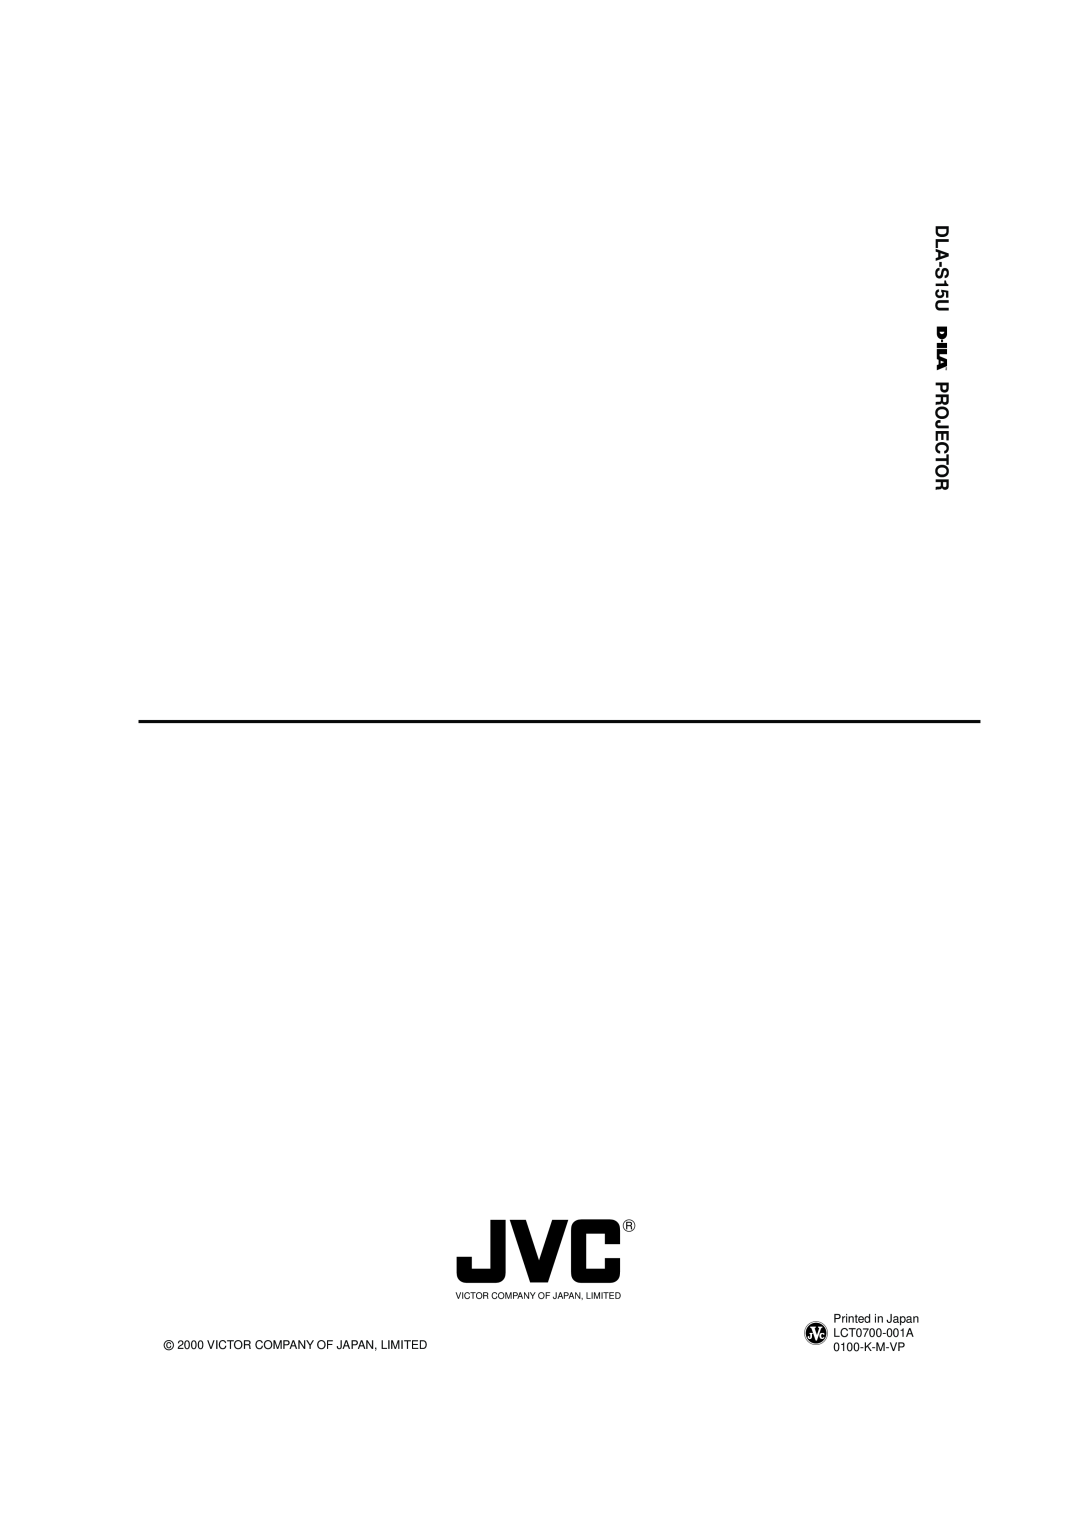 JVC manual DLA-S15U PROJECTOR, Printed in Japan, Victor Company Of Japan, Limited, LCT0700-001A, K-M-Vp 